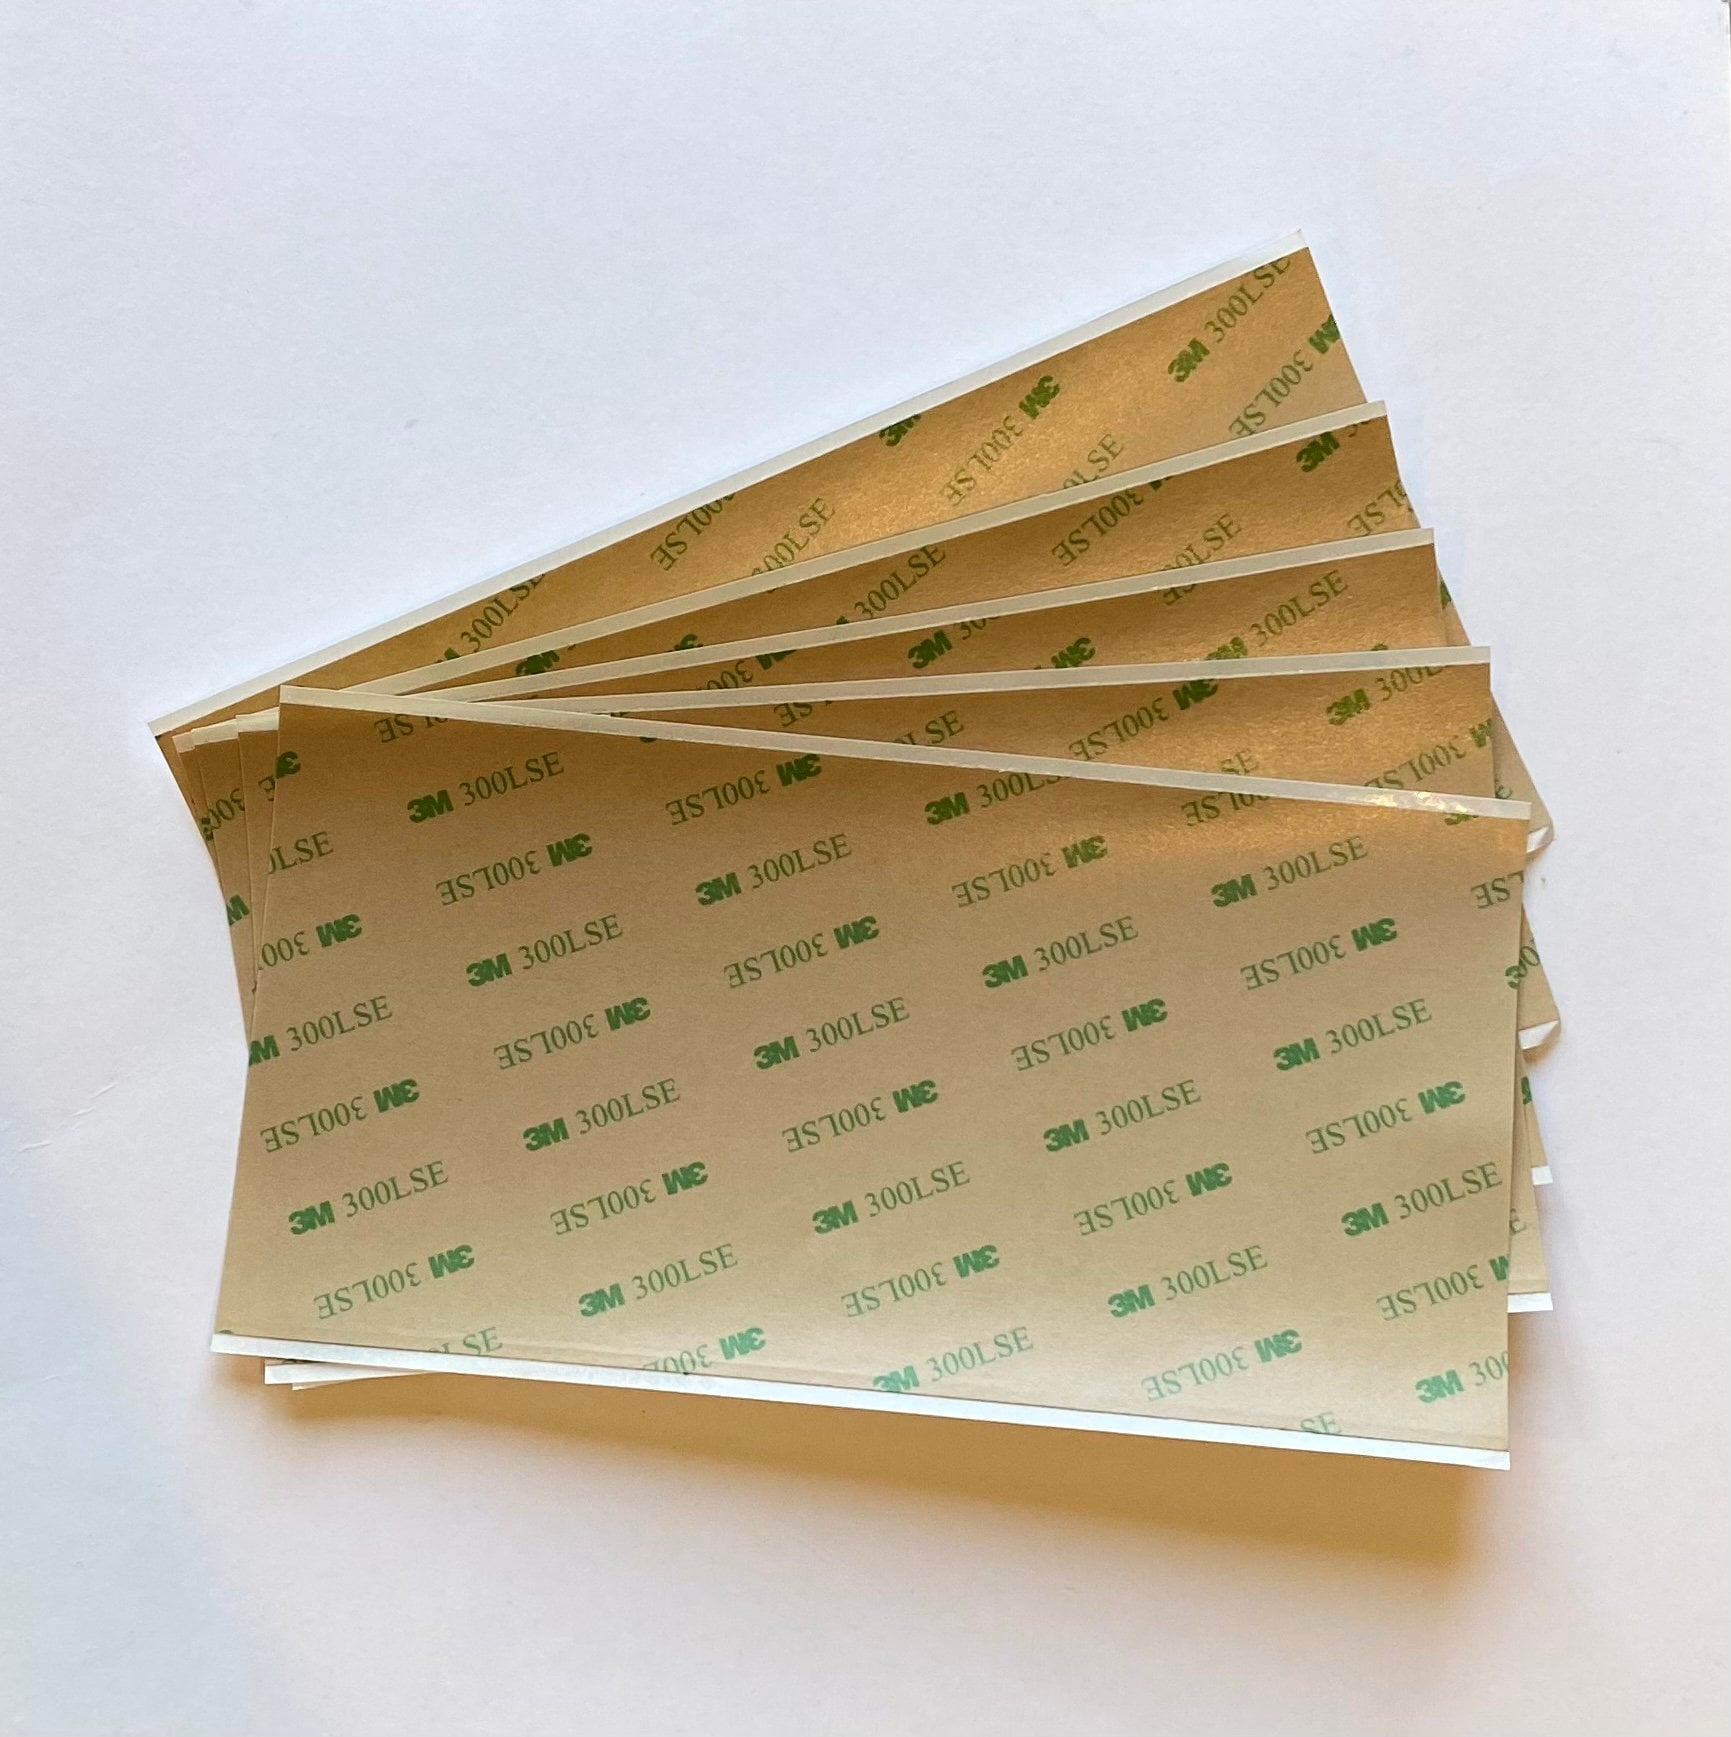 3M 300LSE Adhesive Sheets 10cm X 20cm 3.9 Inch X 7.8 Inch Easy to